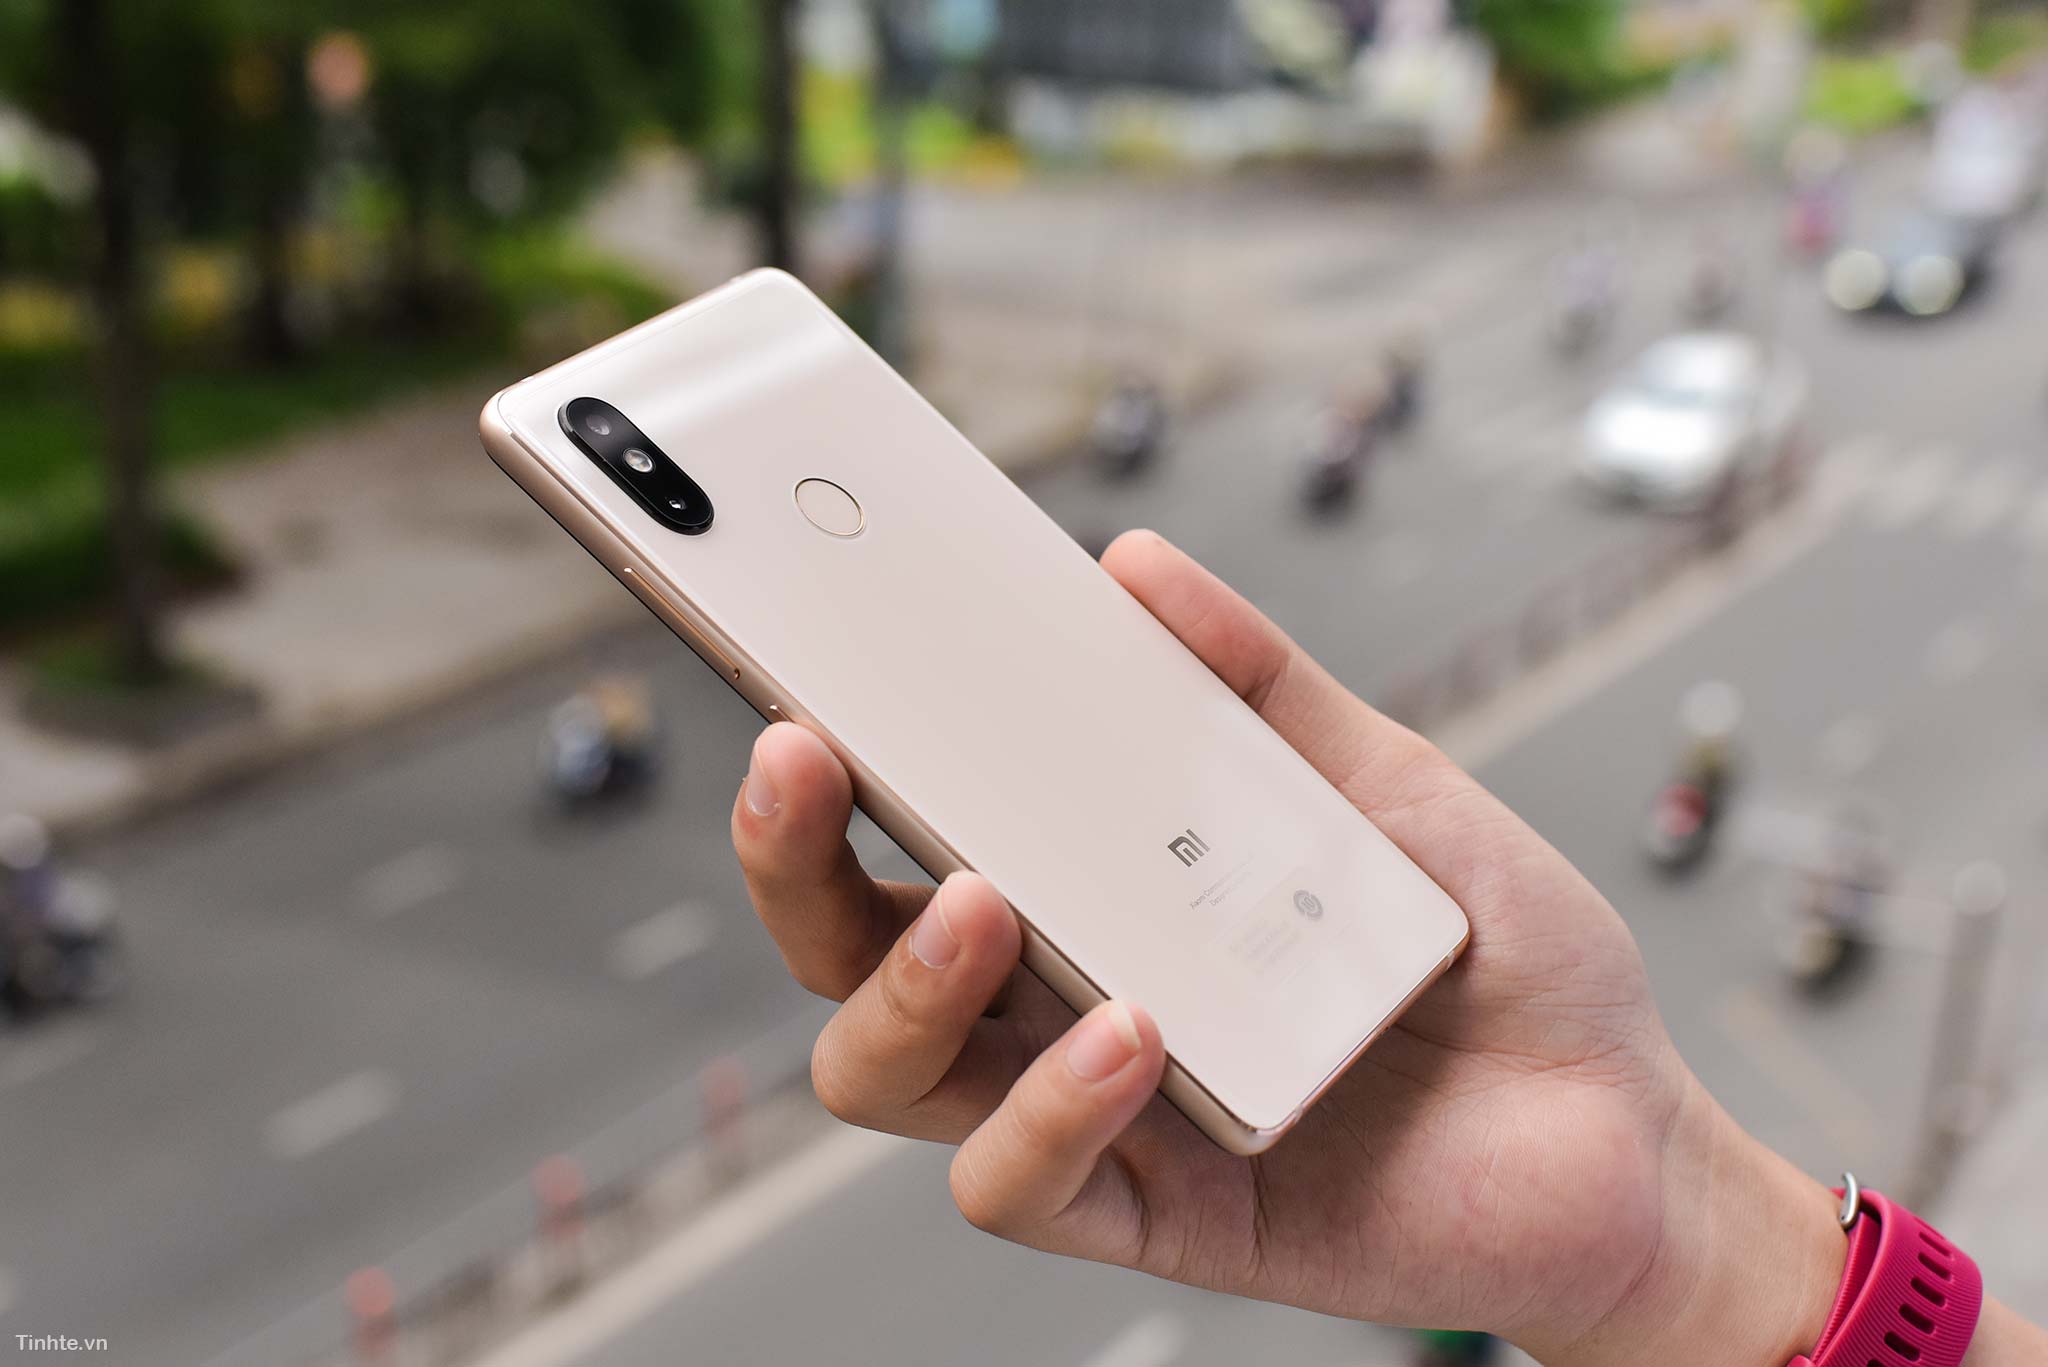 what-networks-can-xiaomi-mi-8-se-connect-to